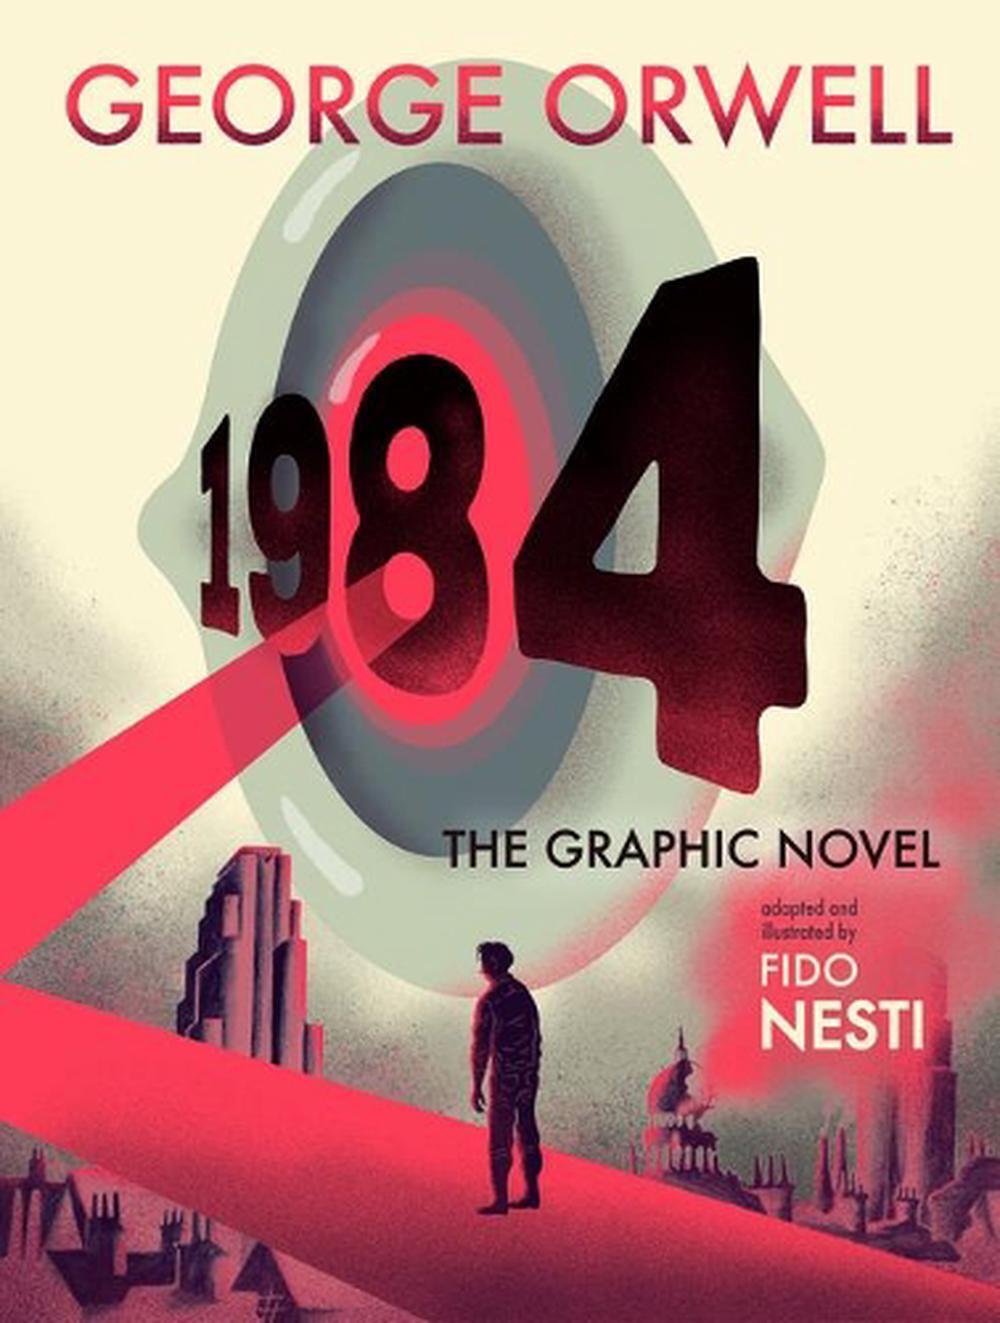 1984: The Graphic Novel by George Orwell (English) Hardcover Book